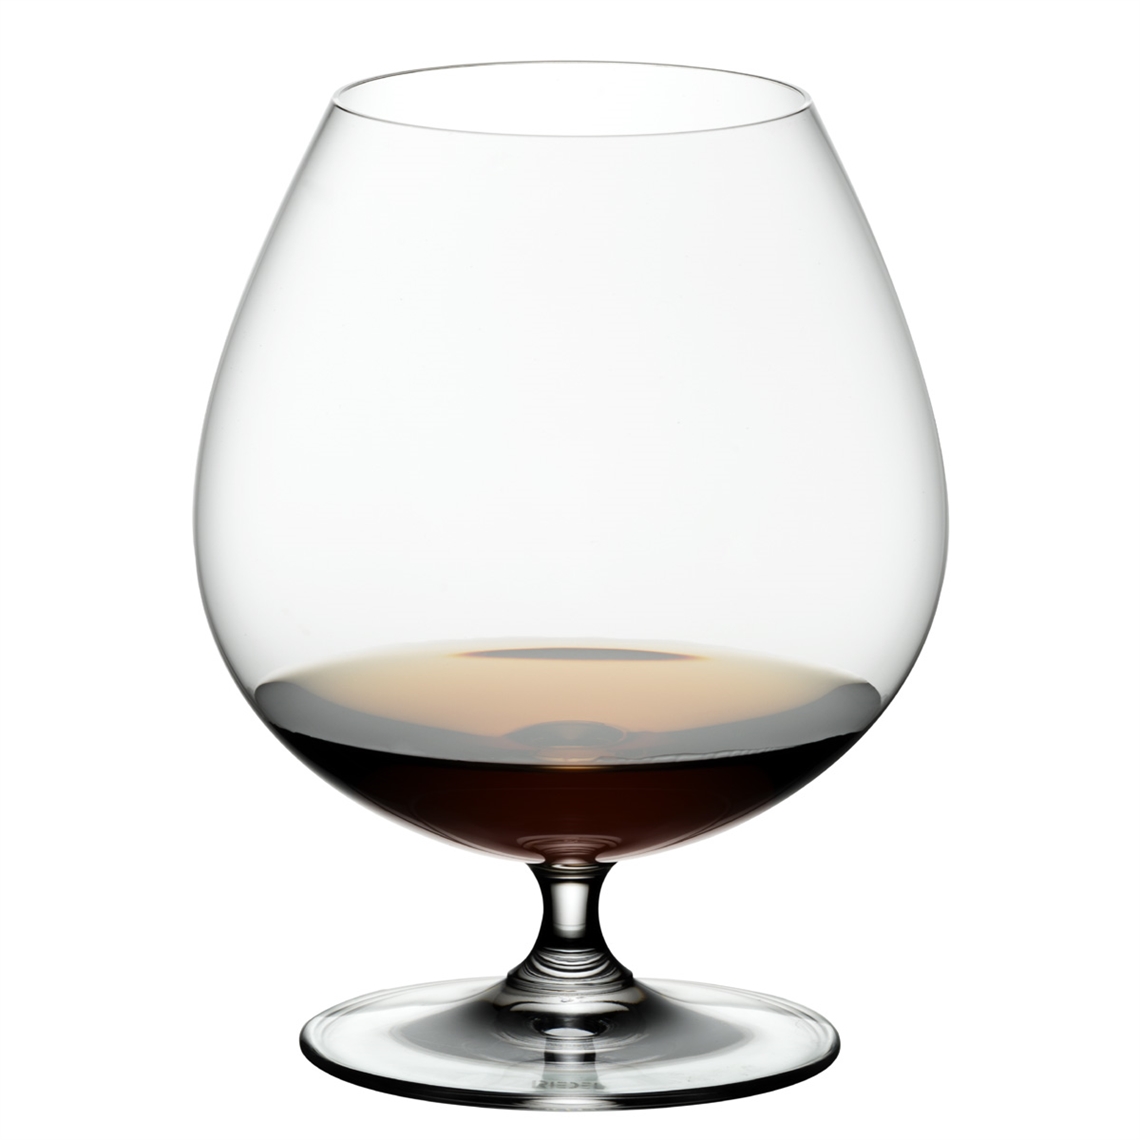 View more glassware from our Spirit Glasses range